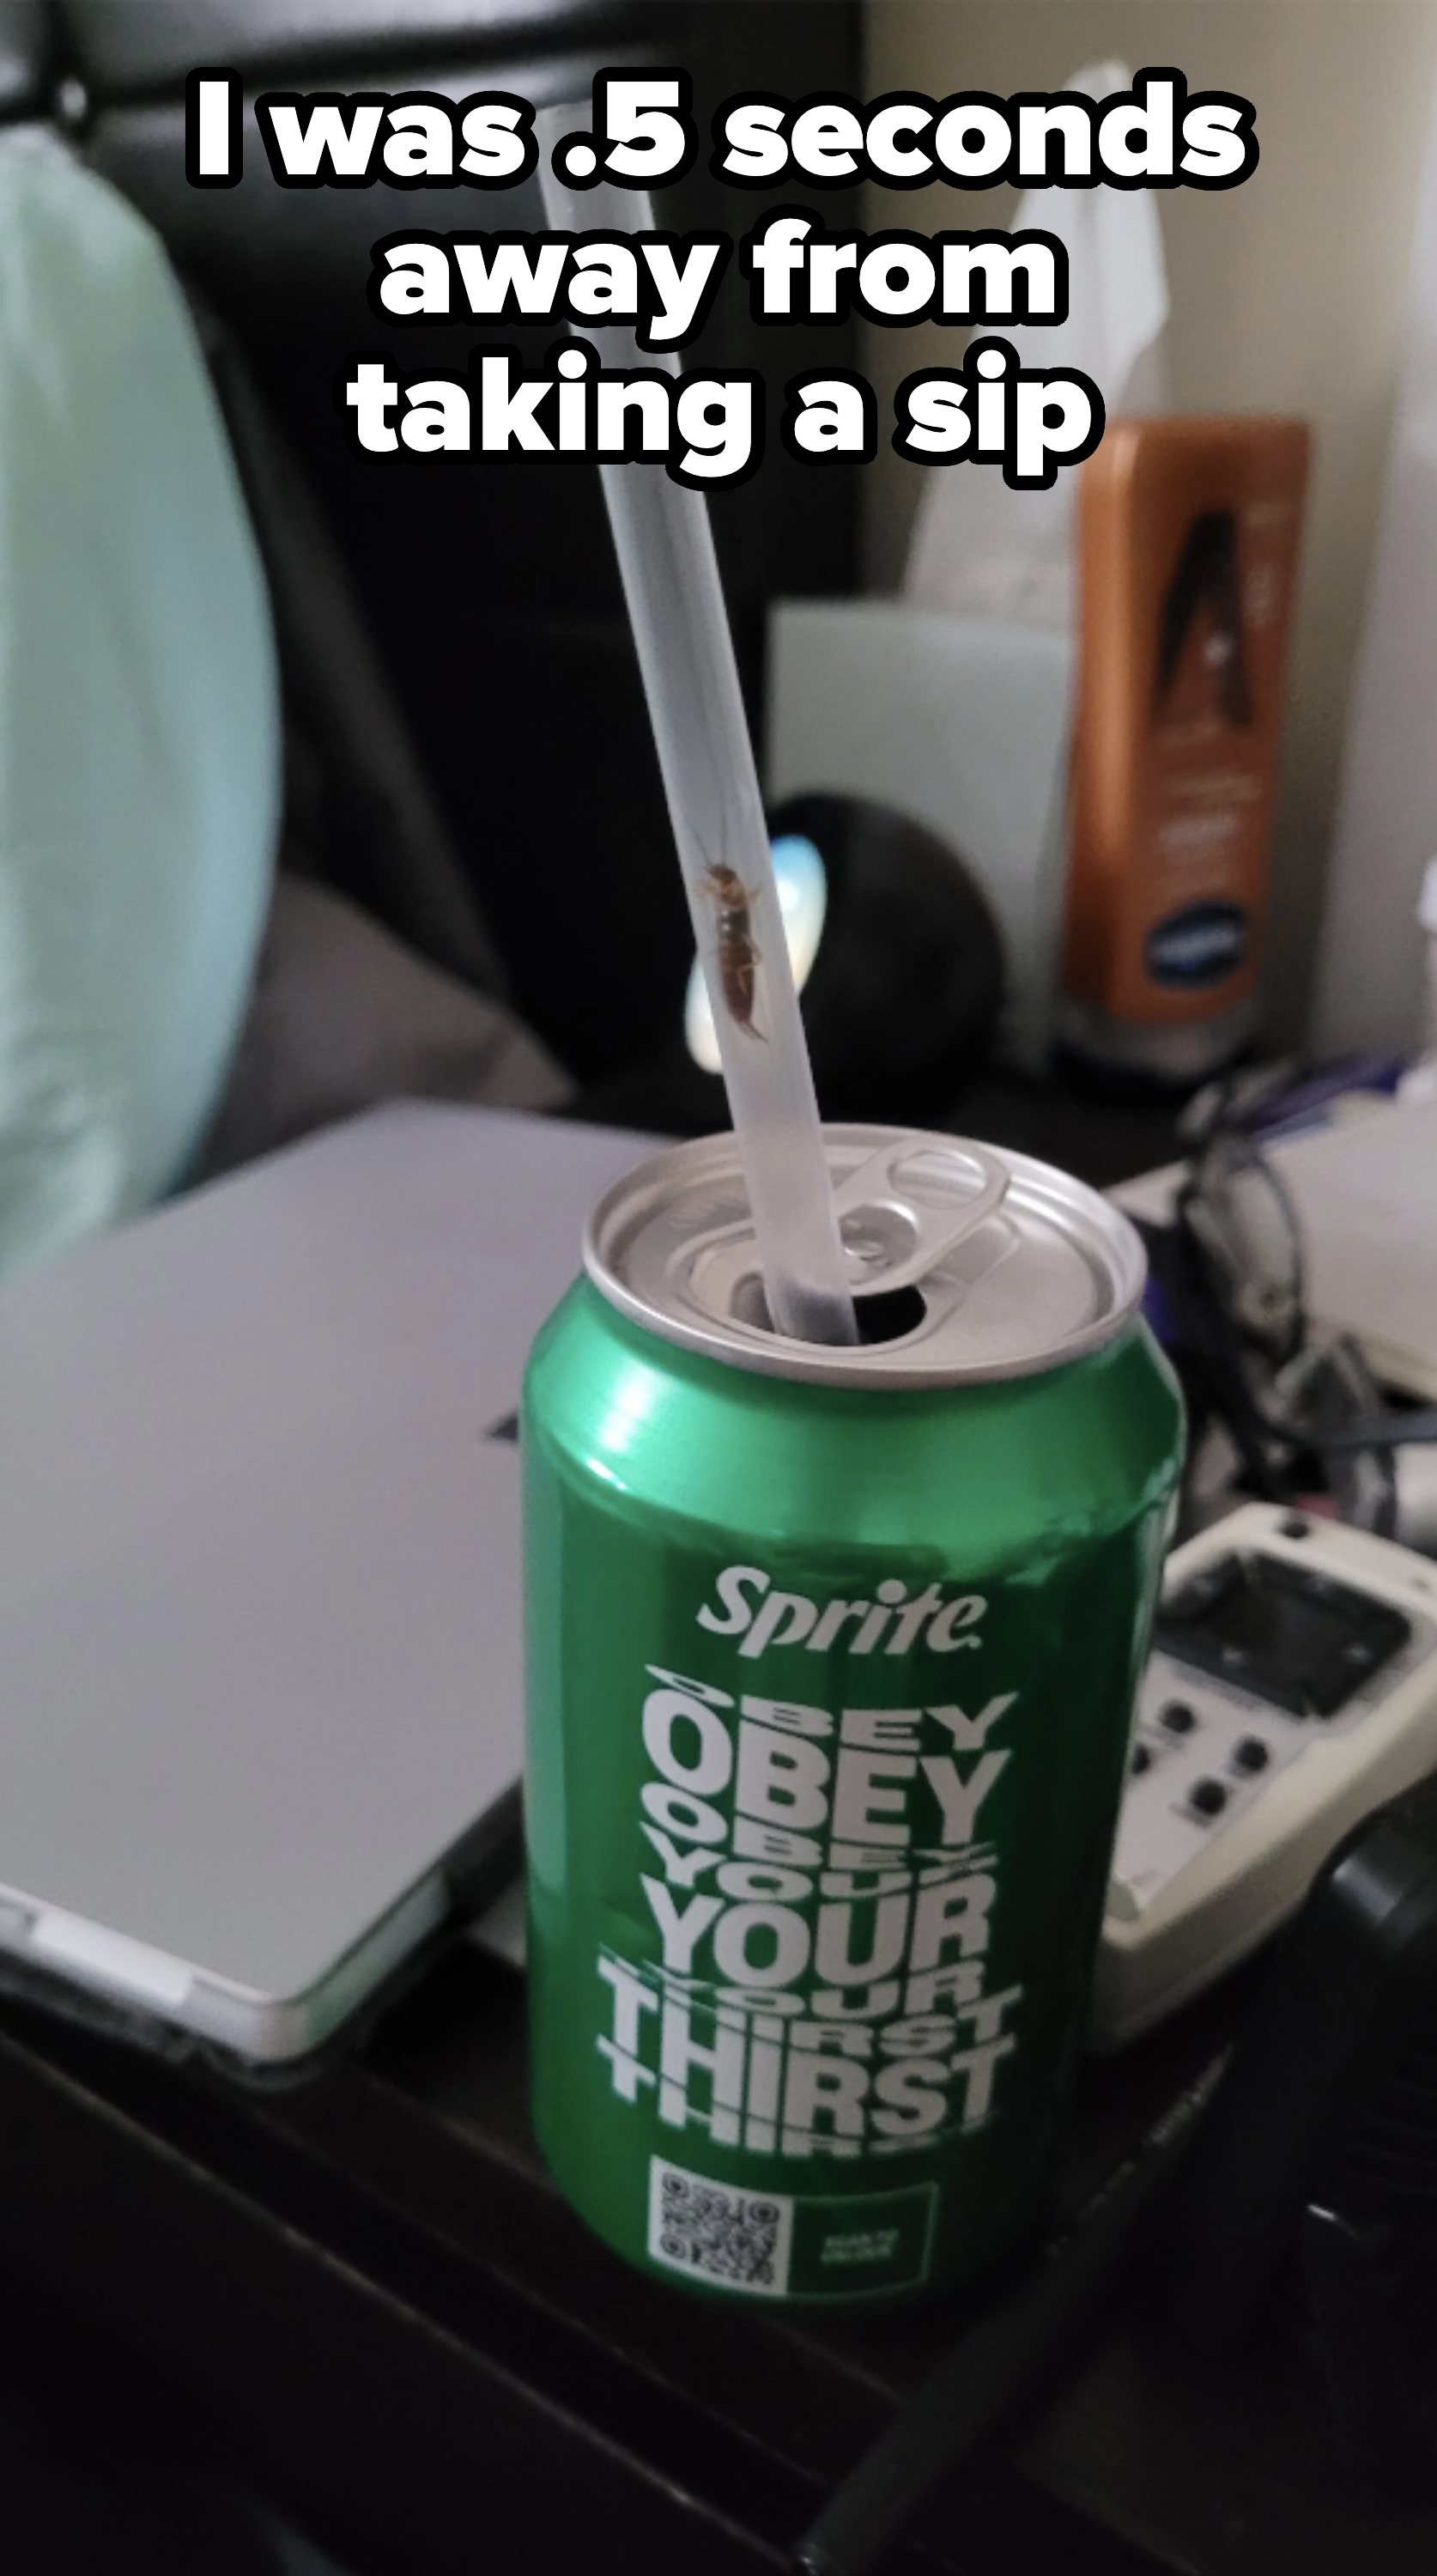 A green Sprite can with a straw. There is an insect crawling inside the straw. The can is on a desk with various items like a tissue box and electronic devices